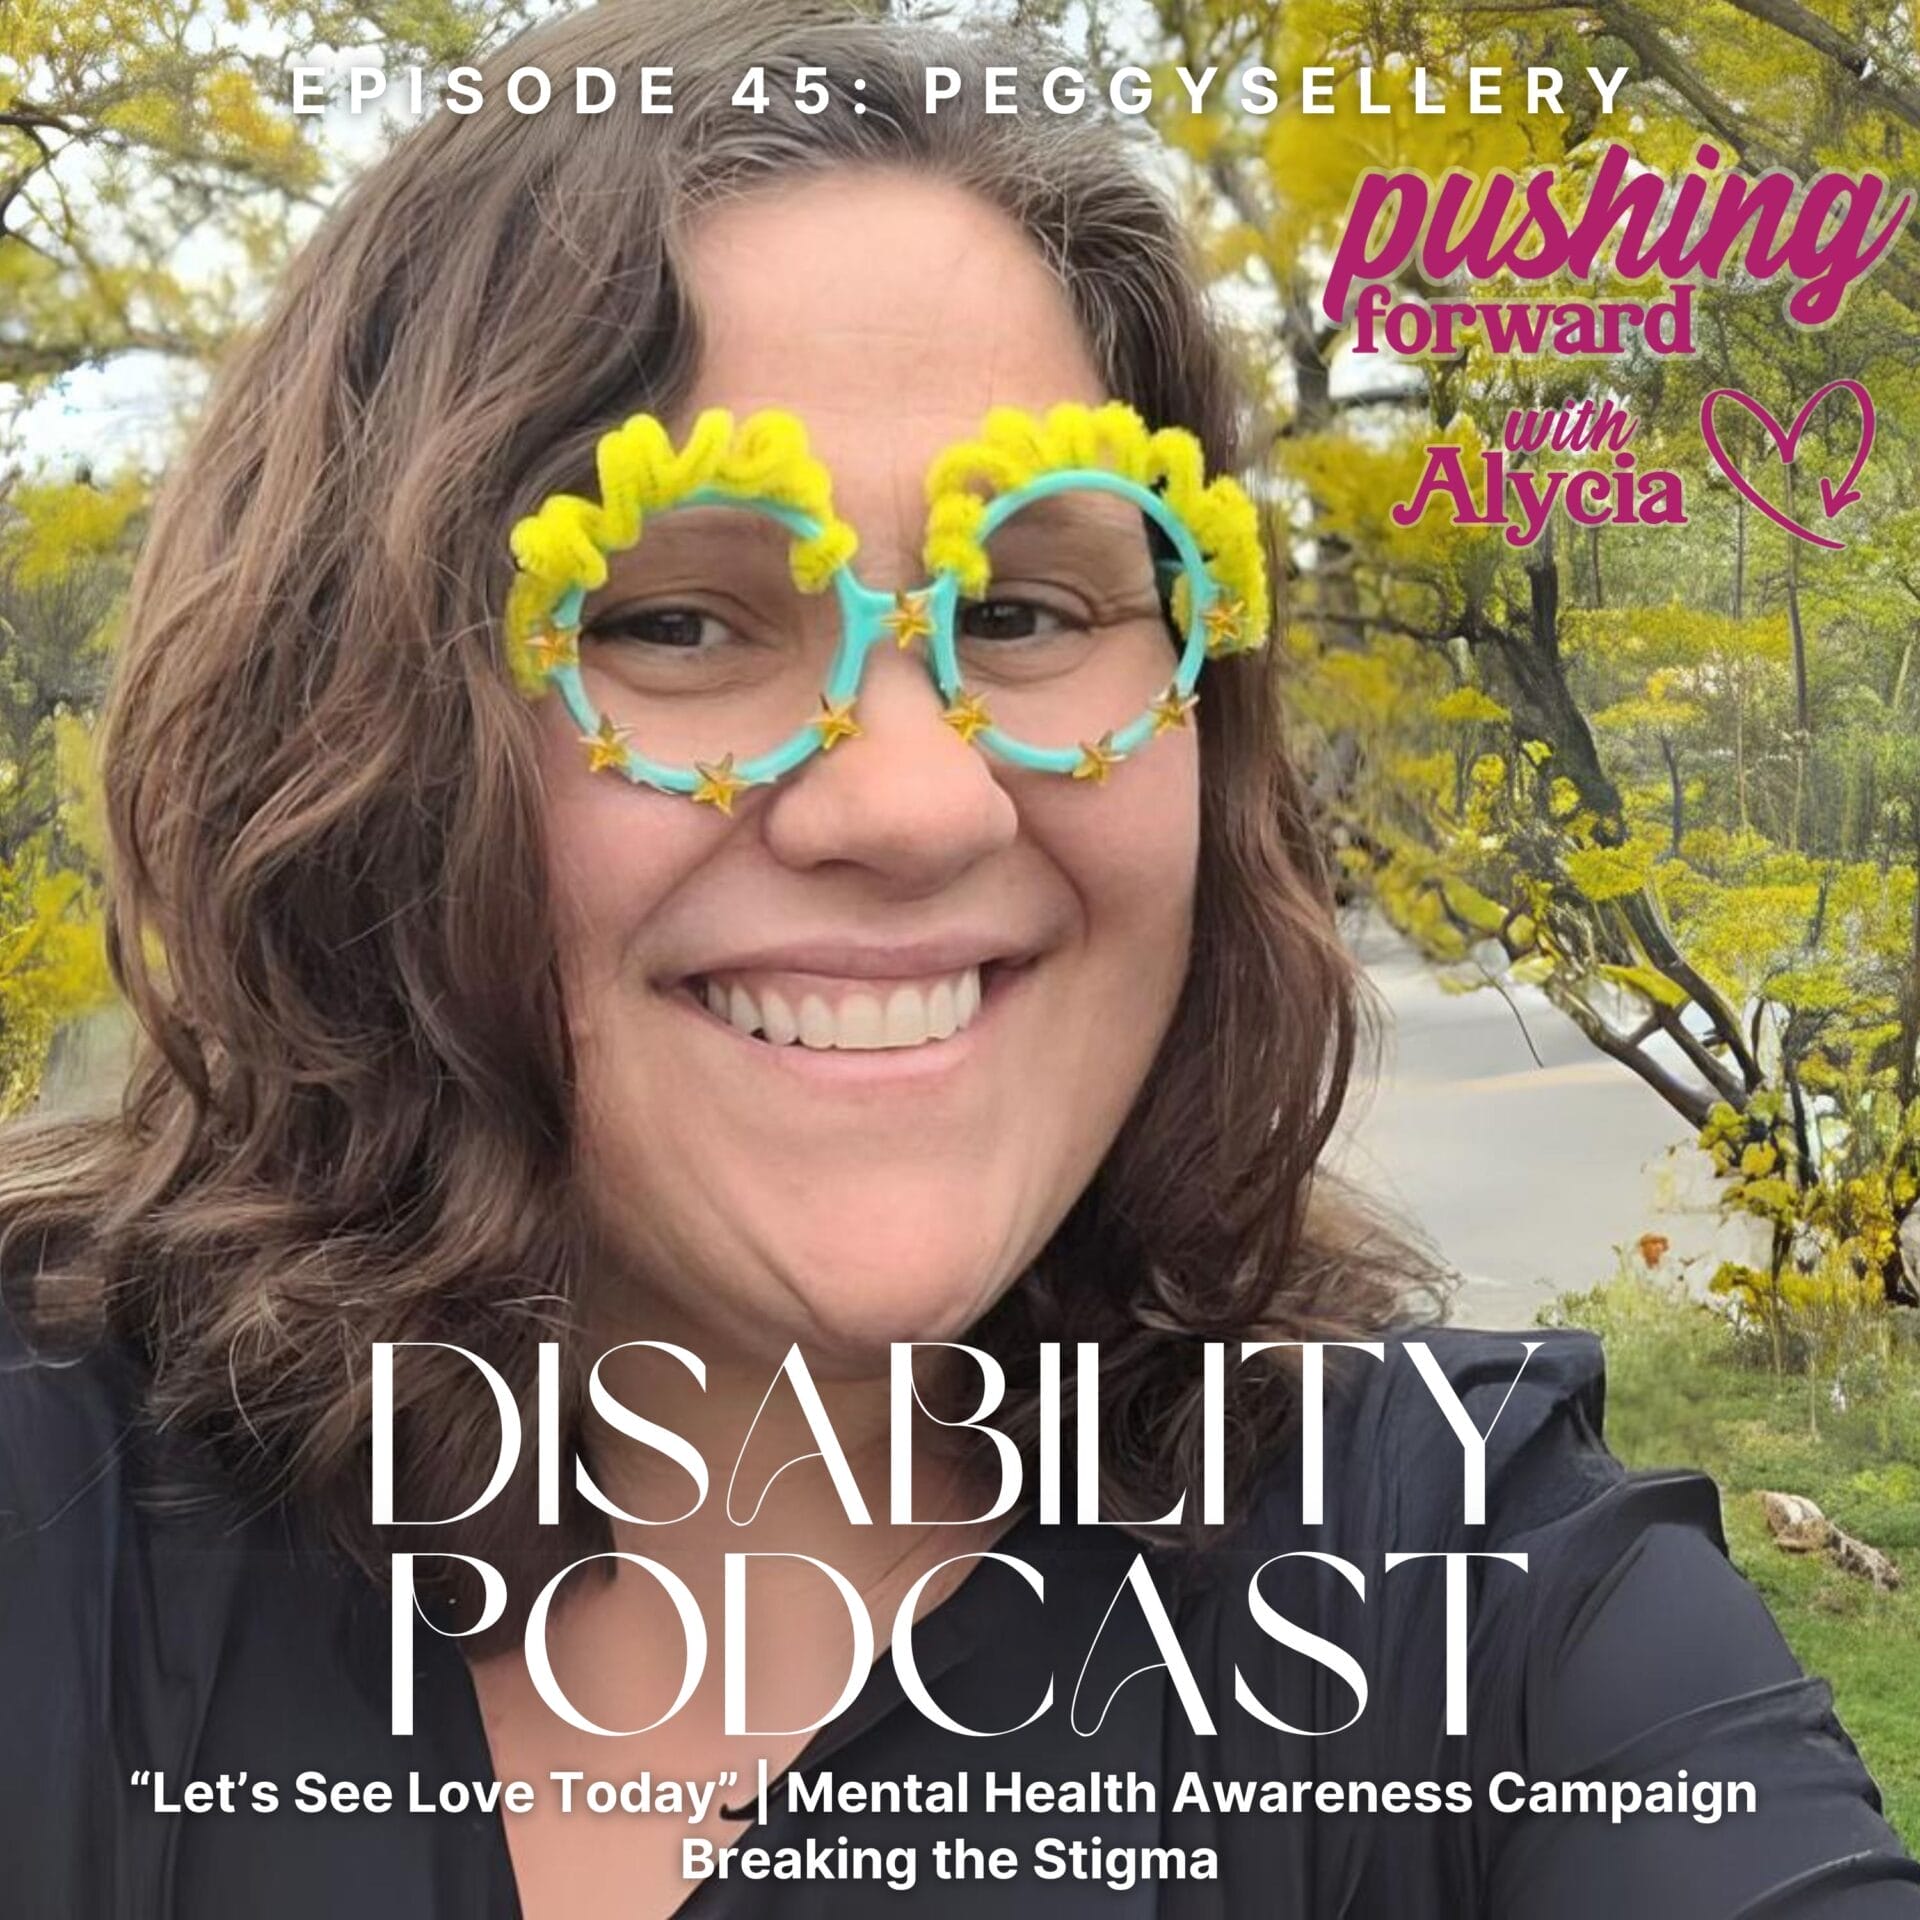 peggy sellery episode forty five pushing forward with alycia mental health awareness month breaking the stigma